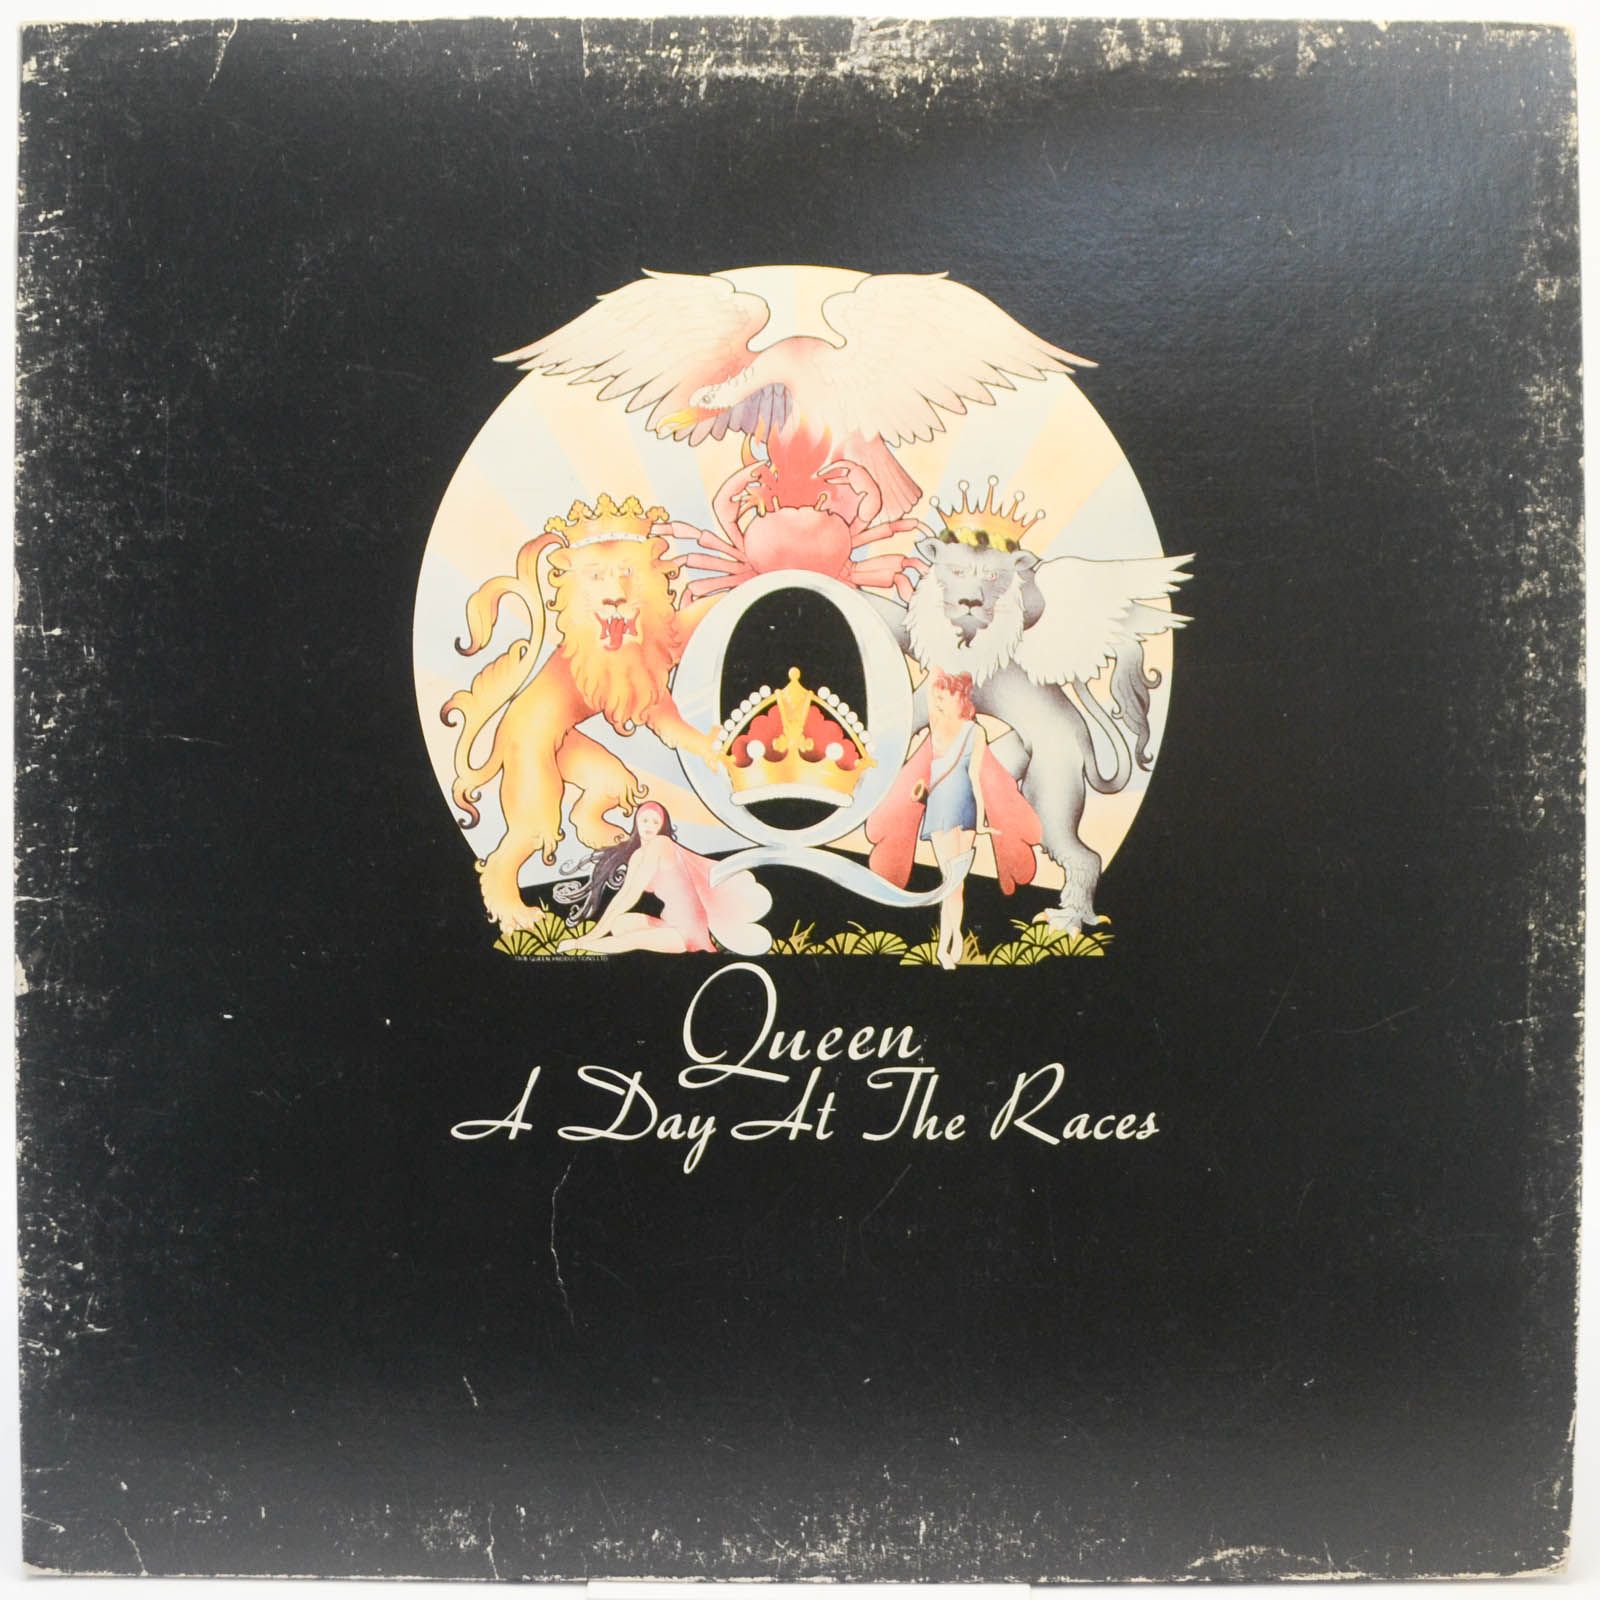 Queen — A Day At The Races (1-st, UK), 1976